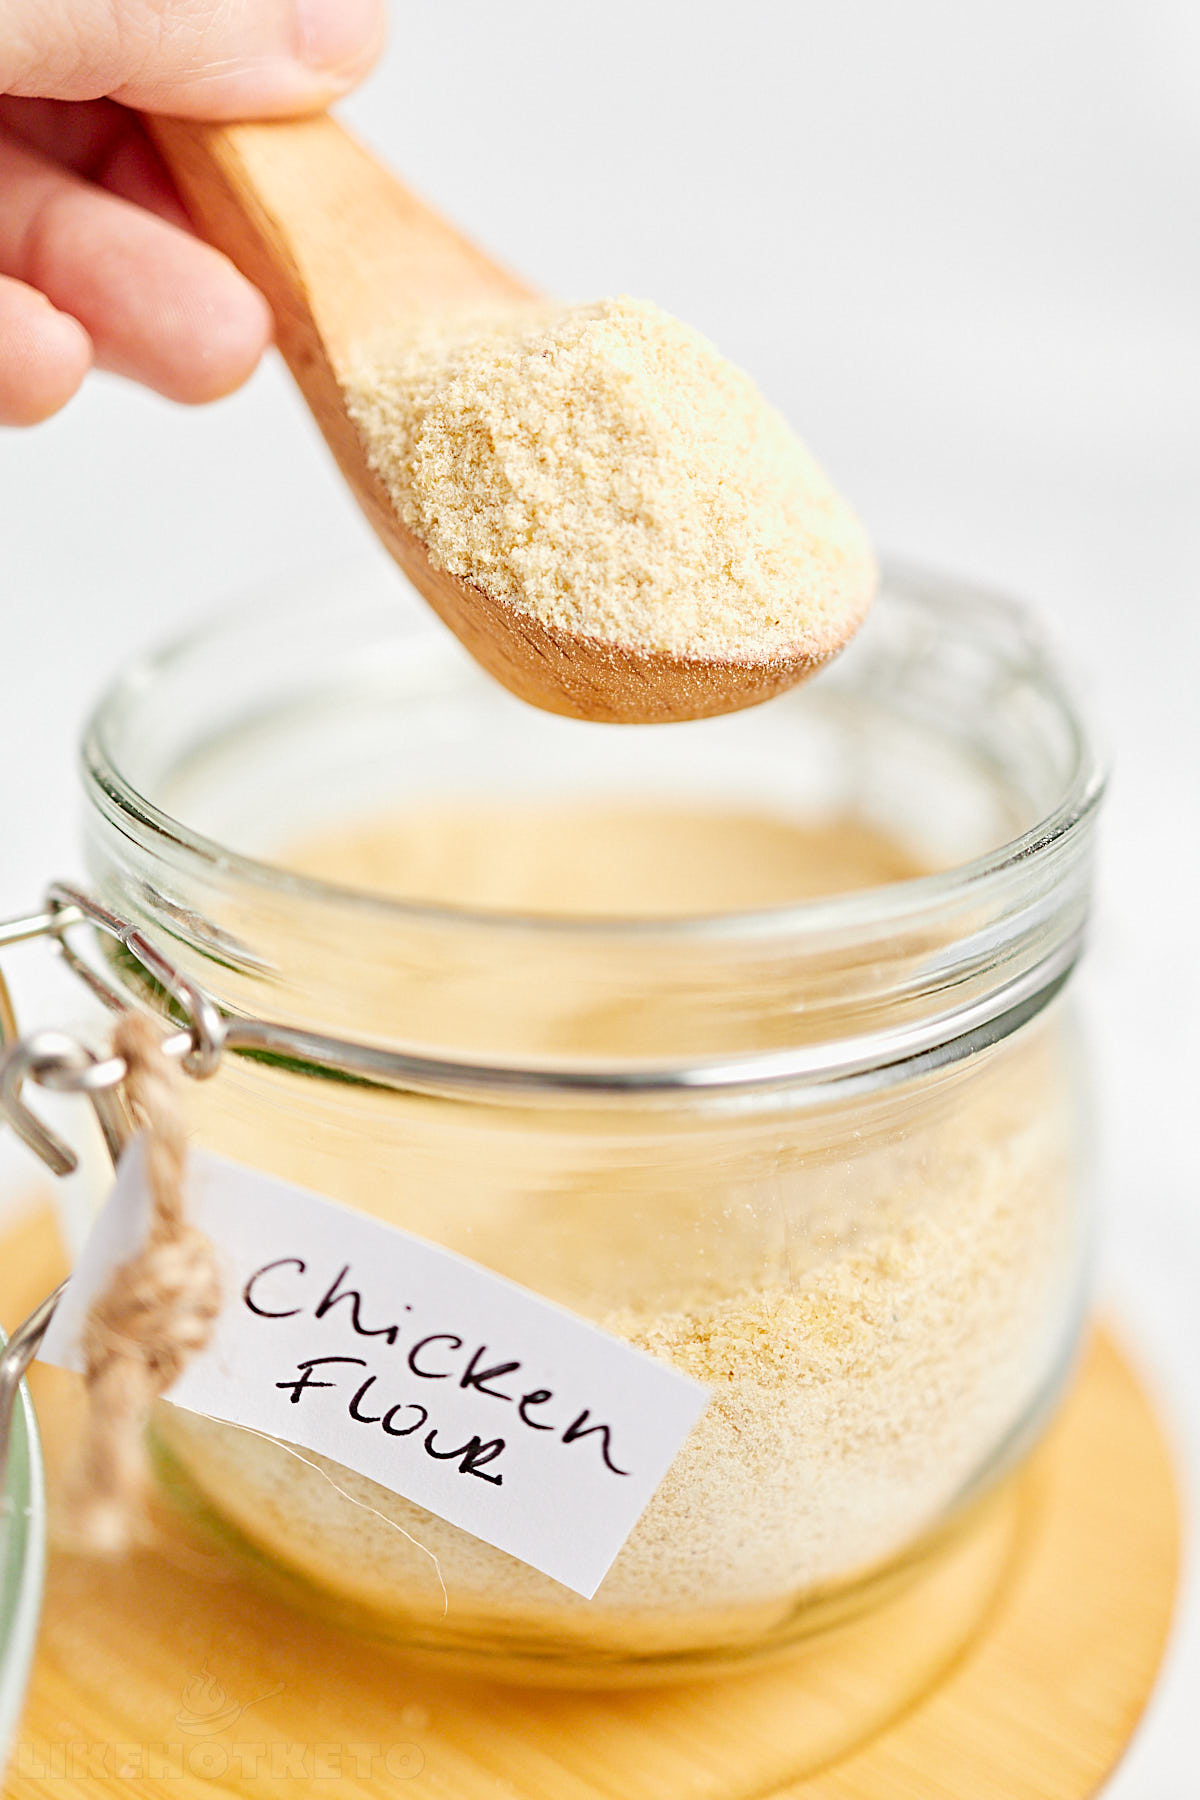 Wooden spoon with chicken powder over a labeled mason jar.